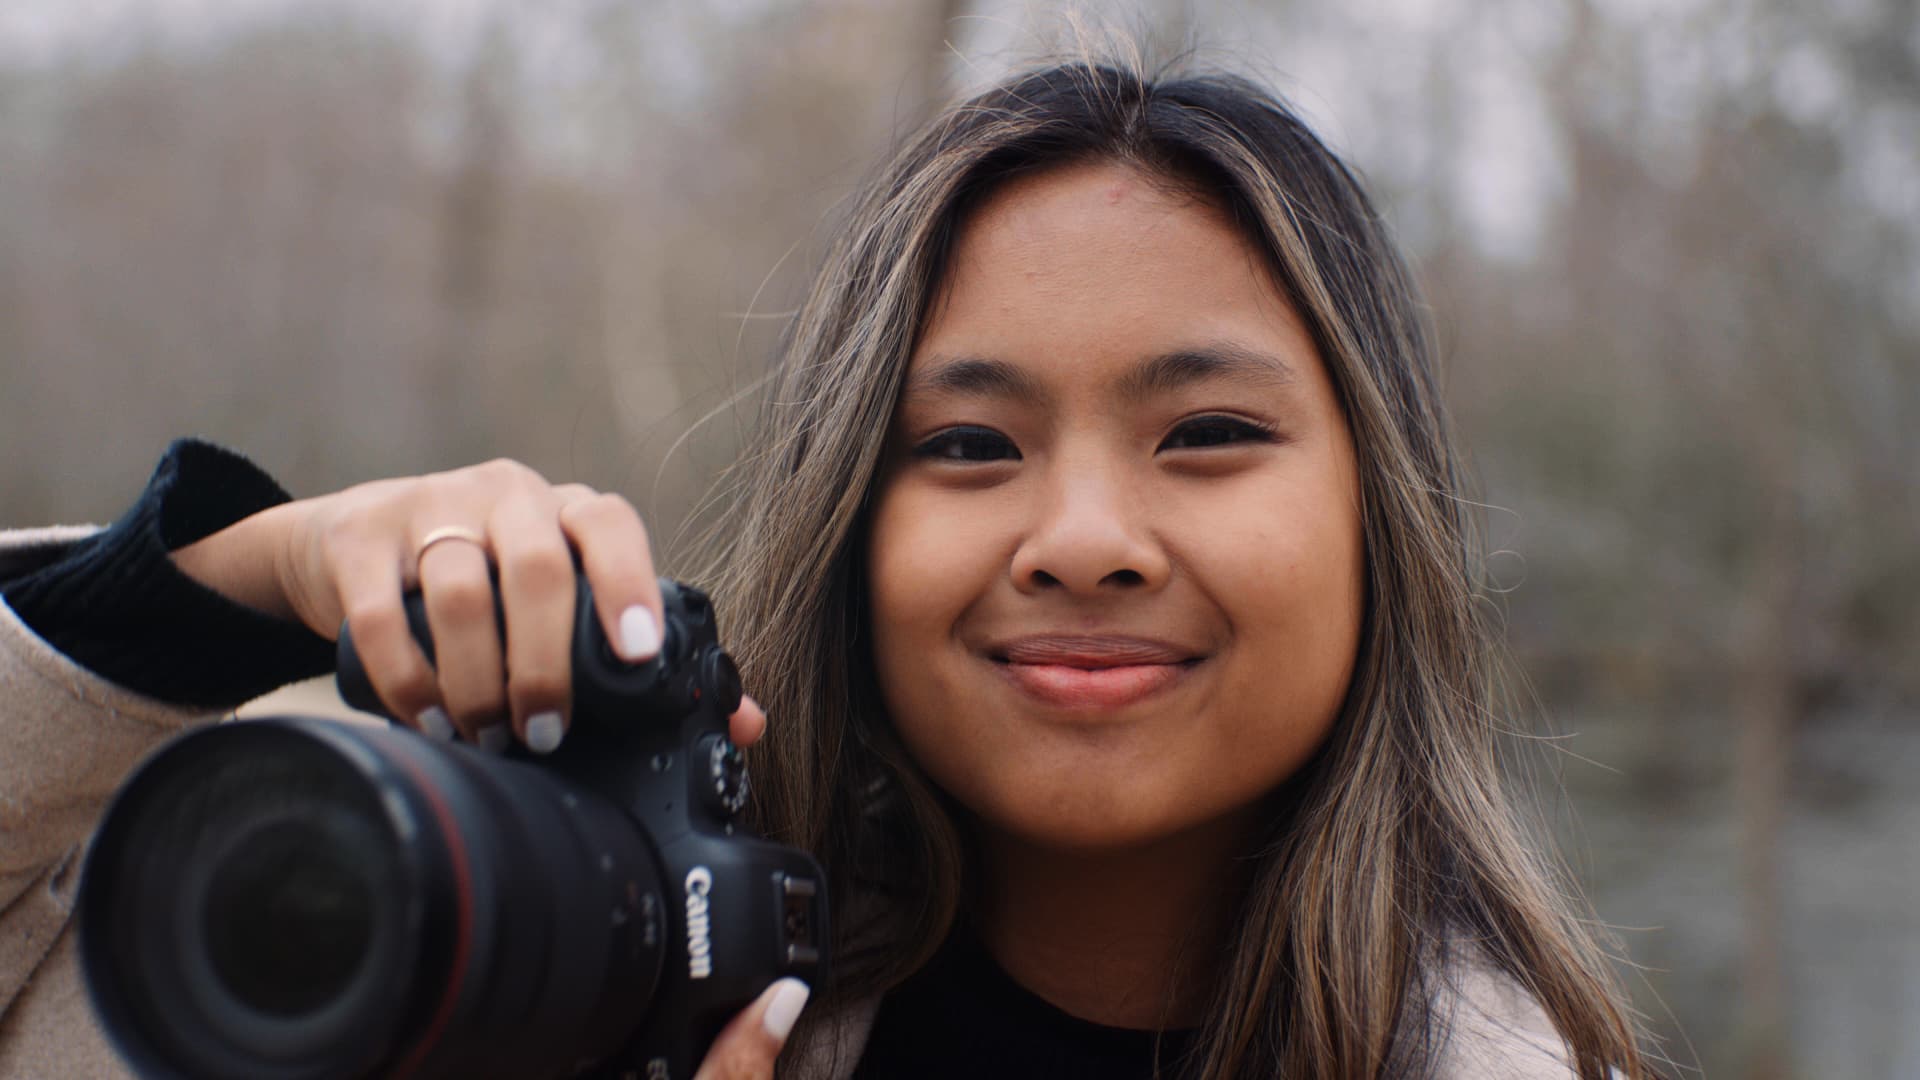 This 23-year-old spent ,000 to become a wedding photographer—now she makes 7,000 per year